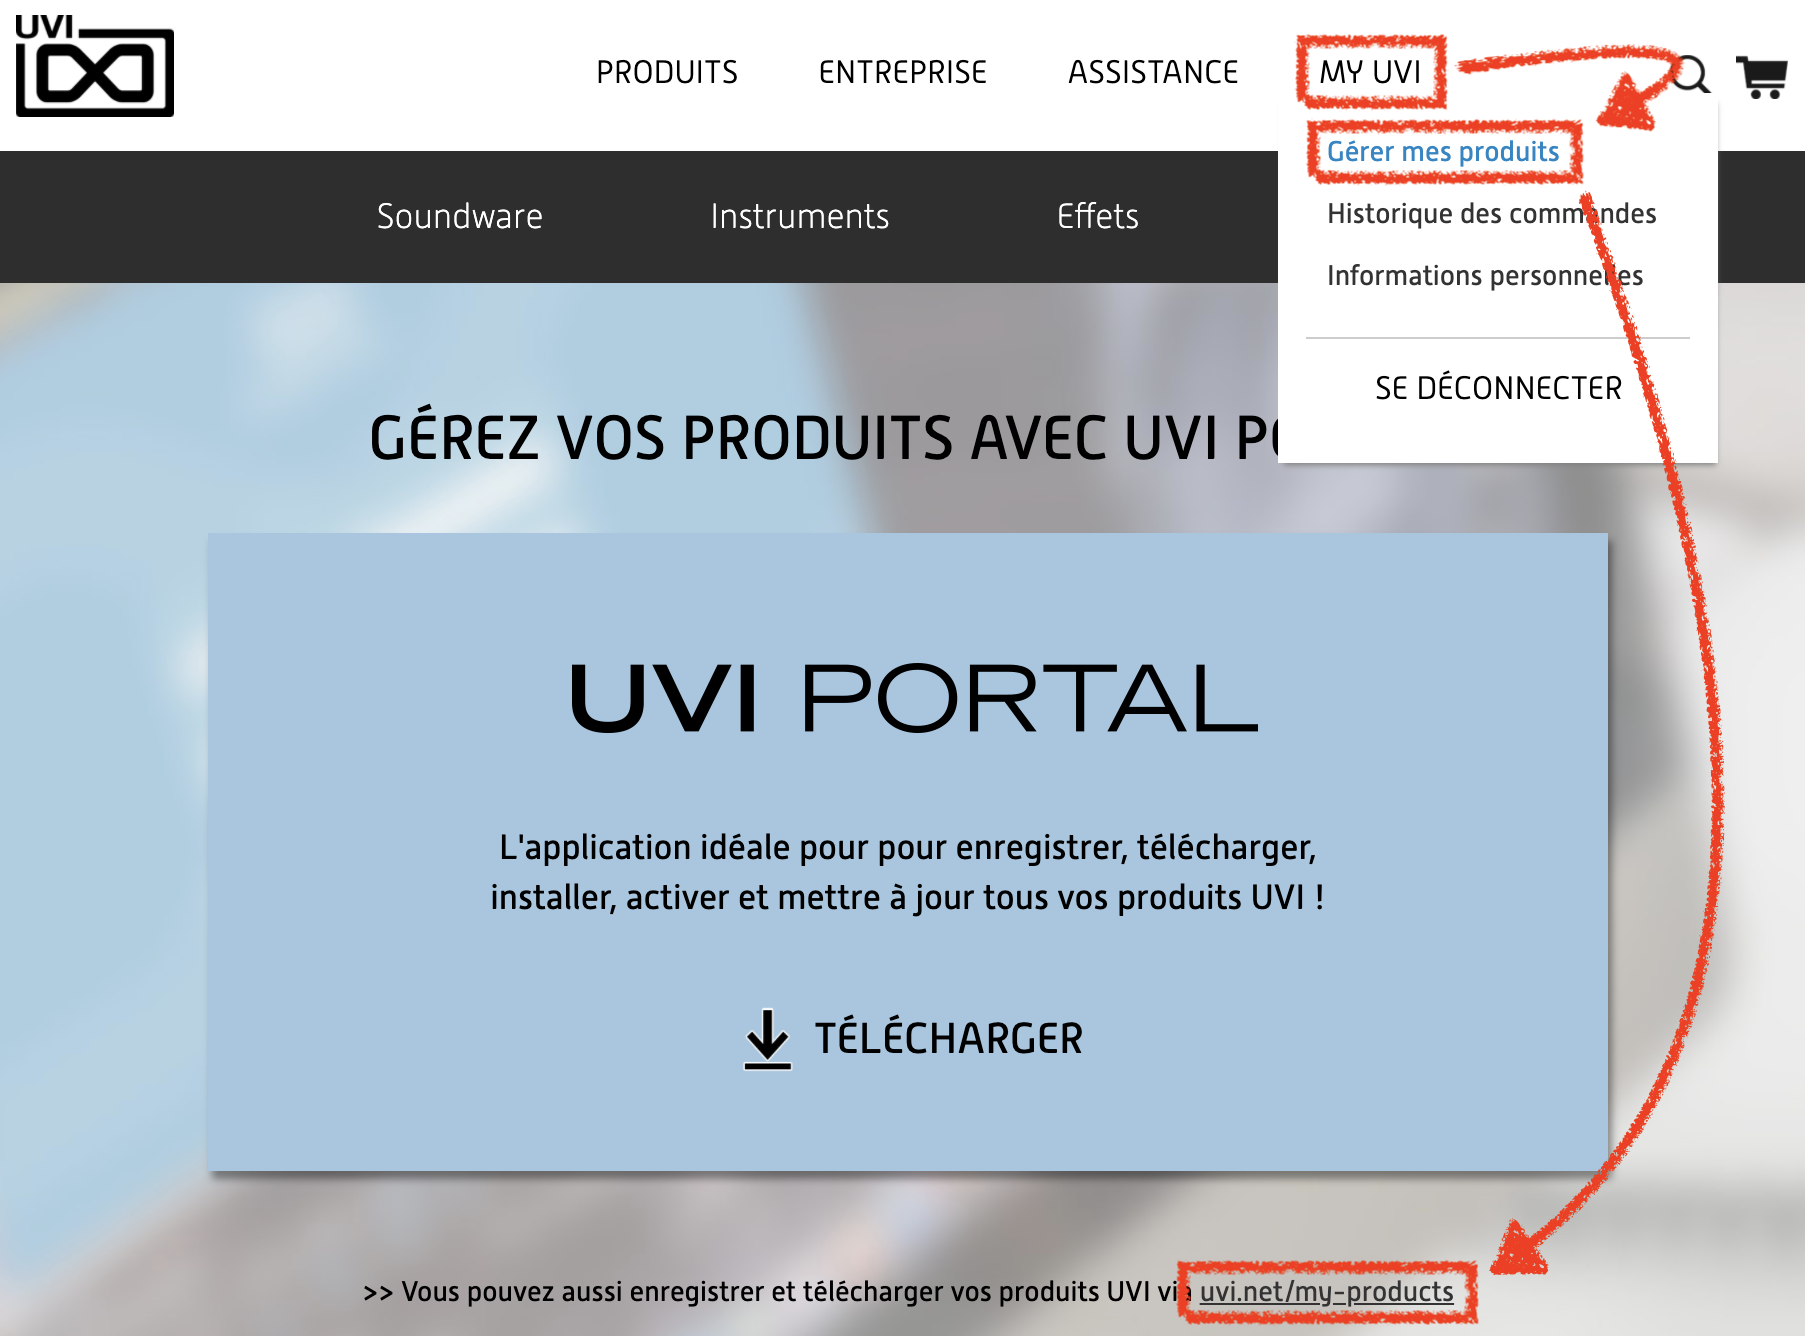 uvi.net_MyProducts_New_FR.png